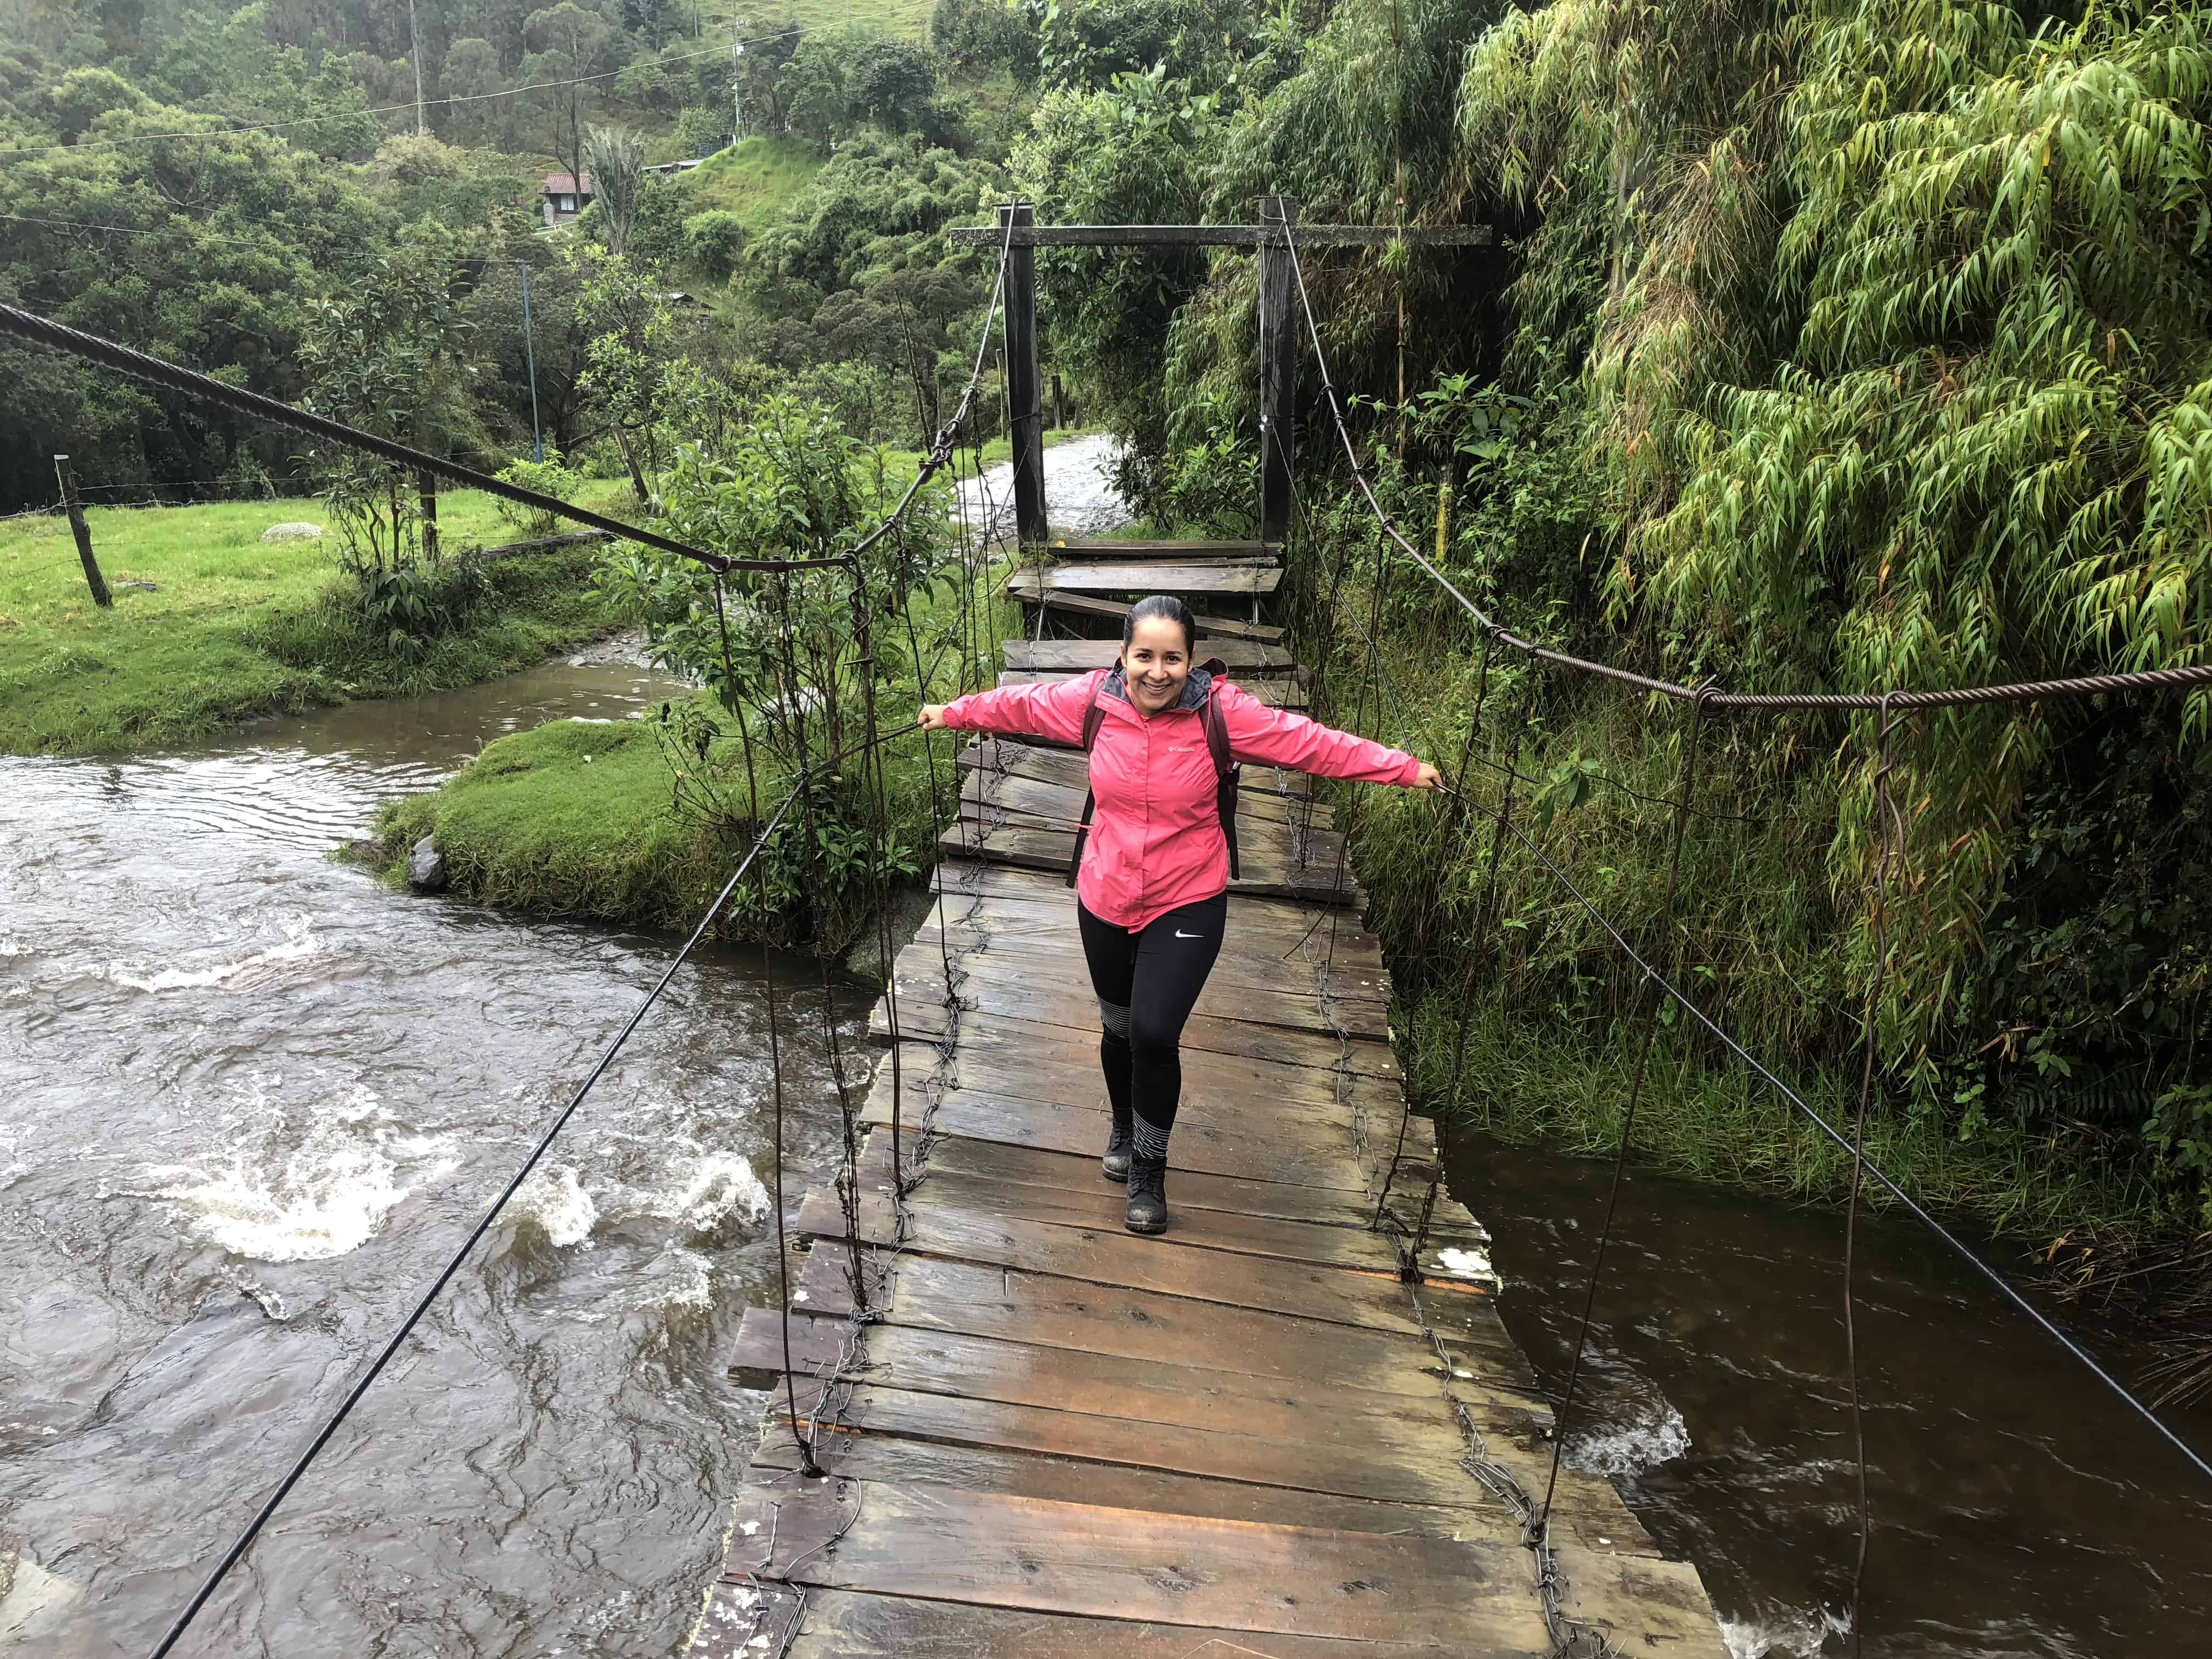 Marisol crossing the first suspension bridge at Cocora Valley in Quindío, Colombia